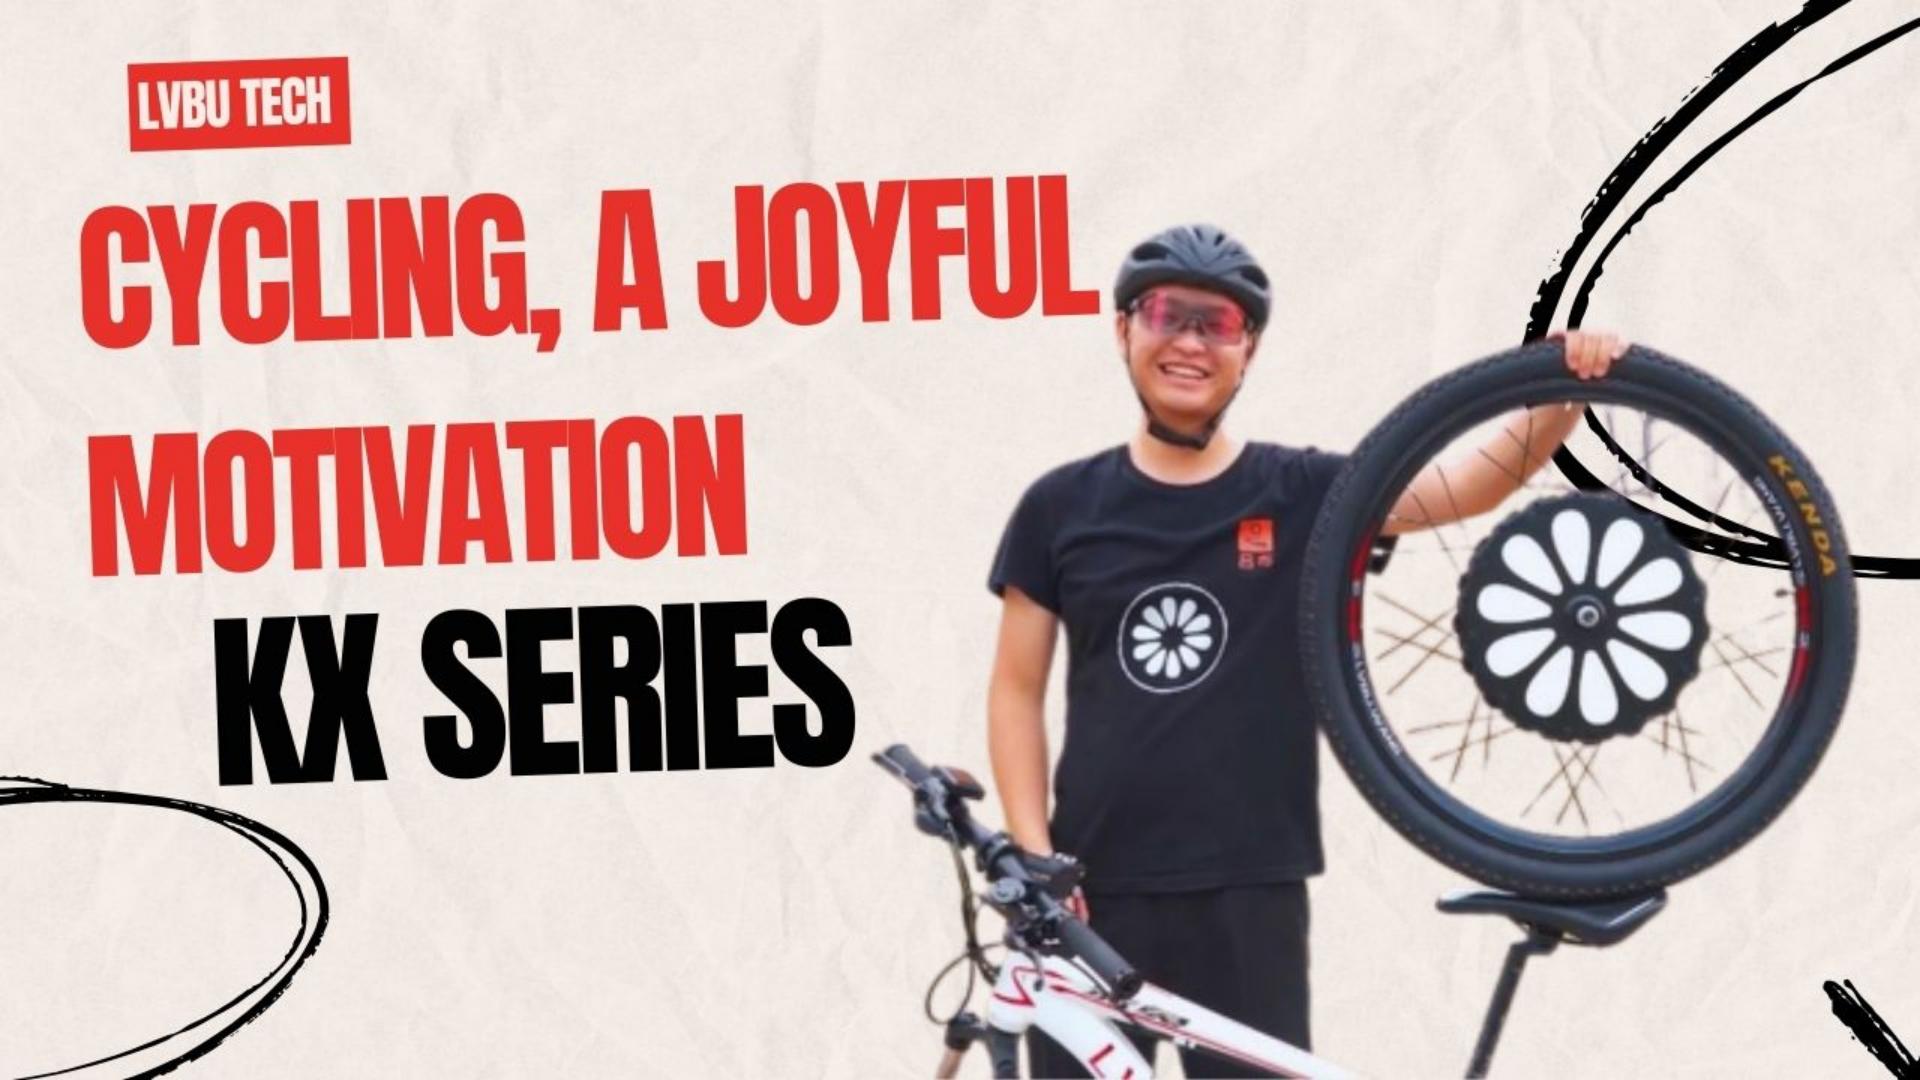 ALL-IN-ONE Ebike kit ‖ Cycling with KX Series, a joyful motivation